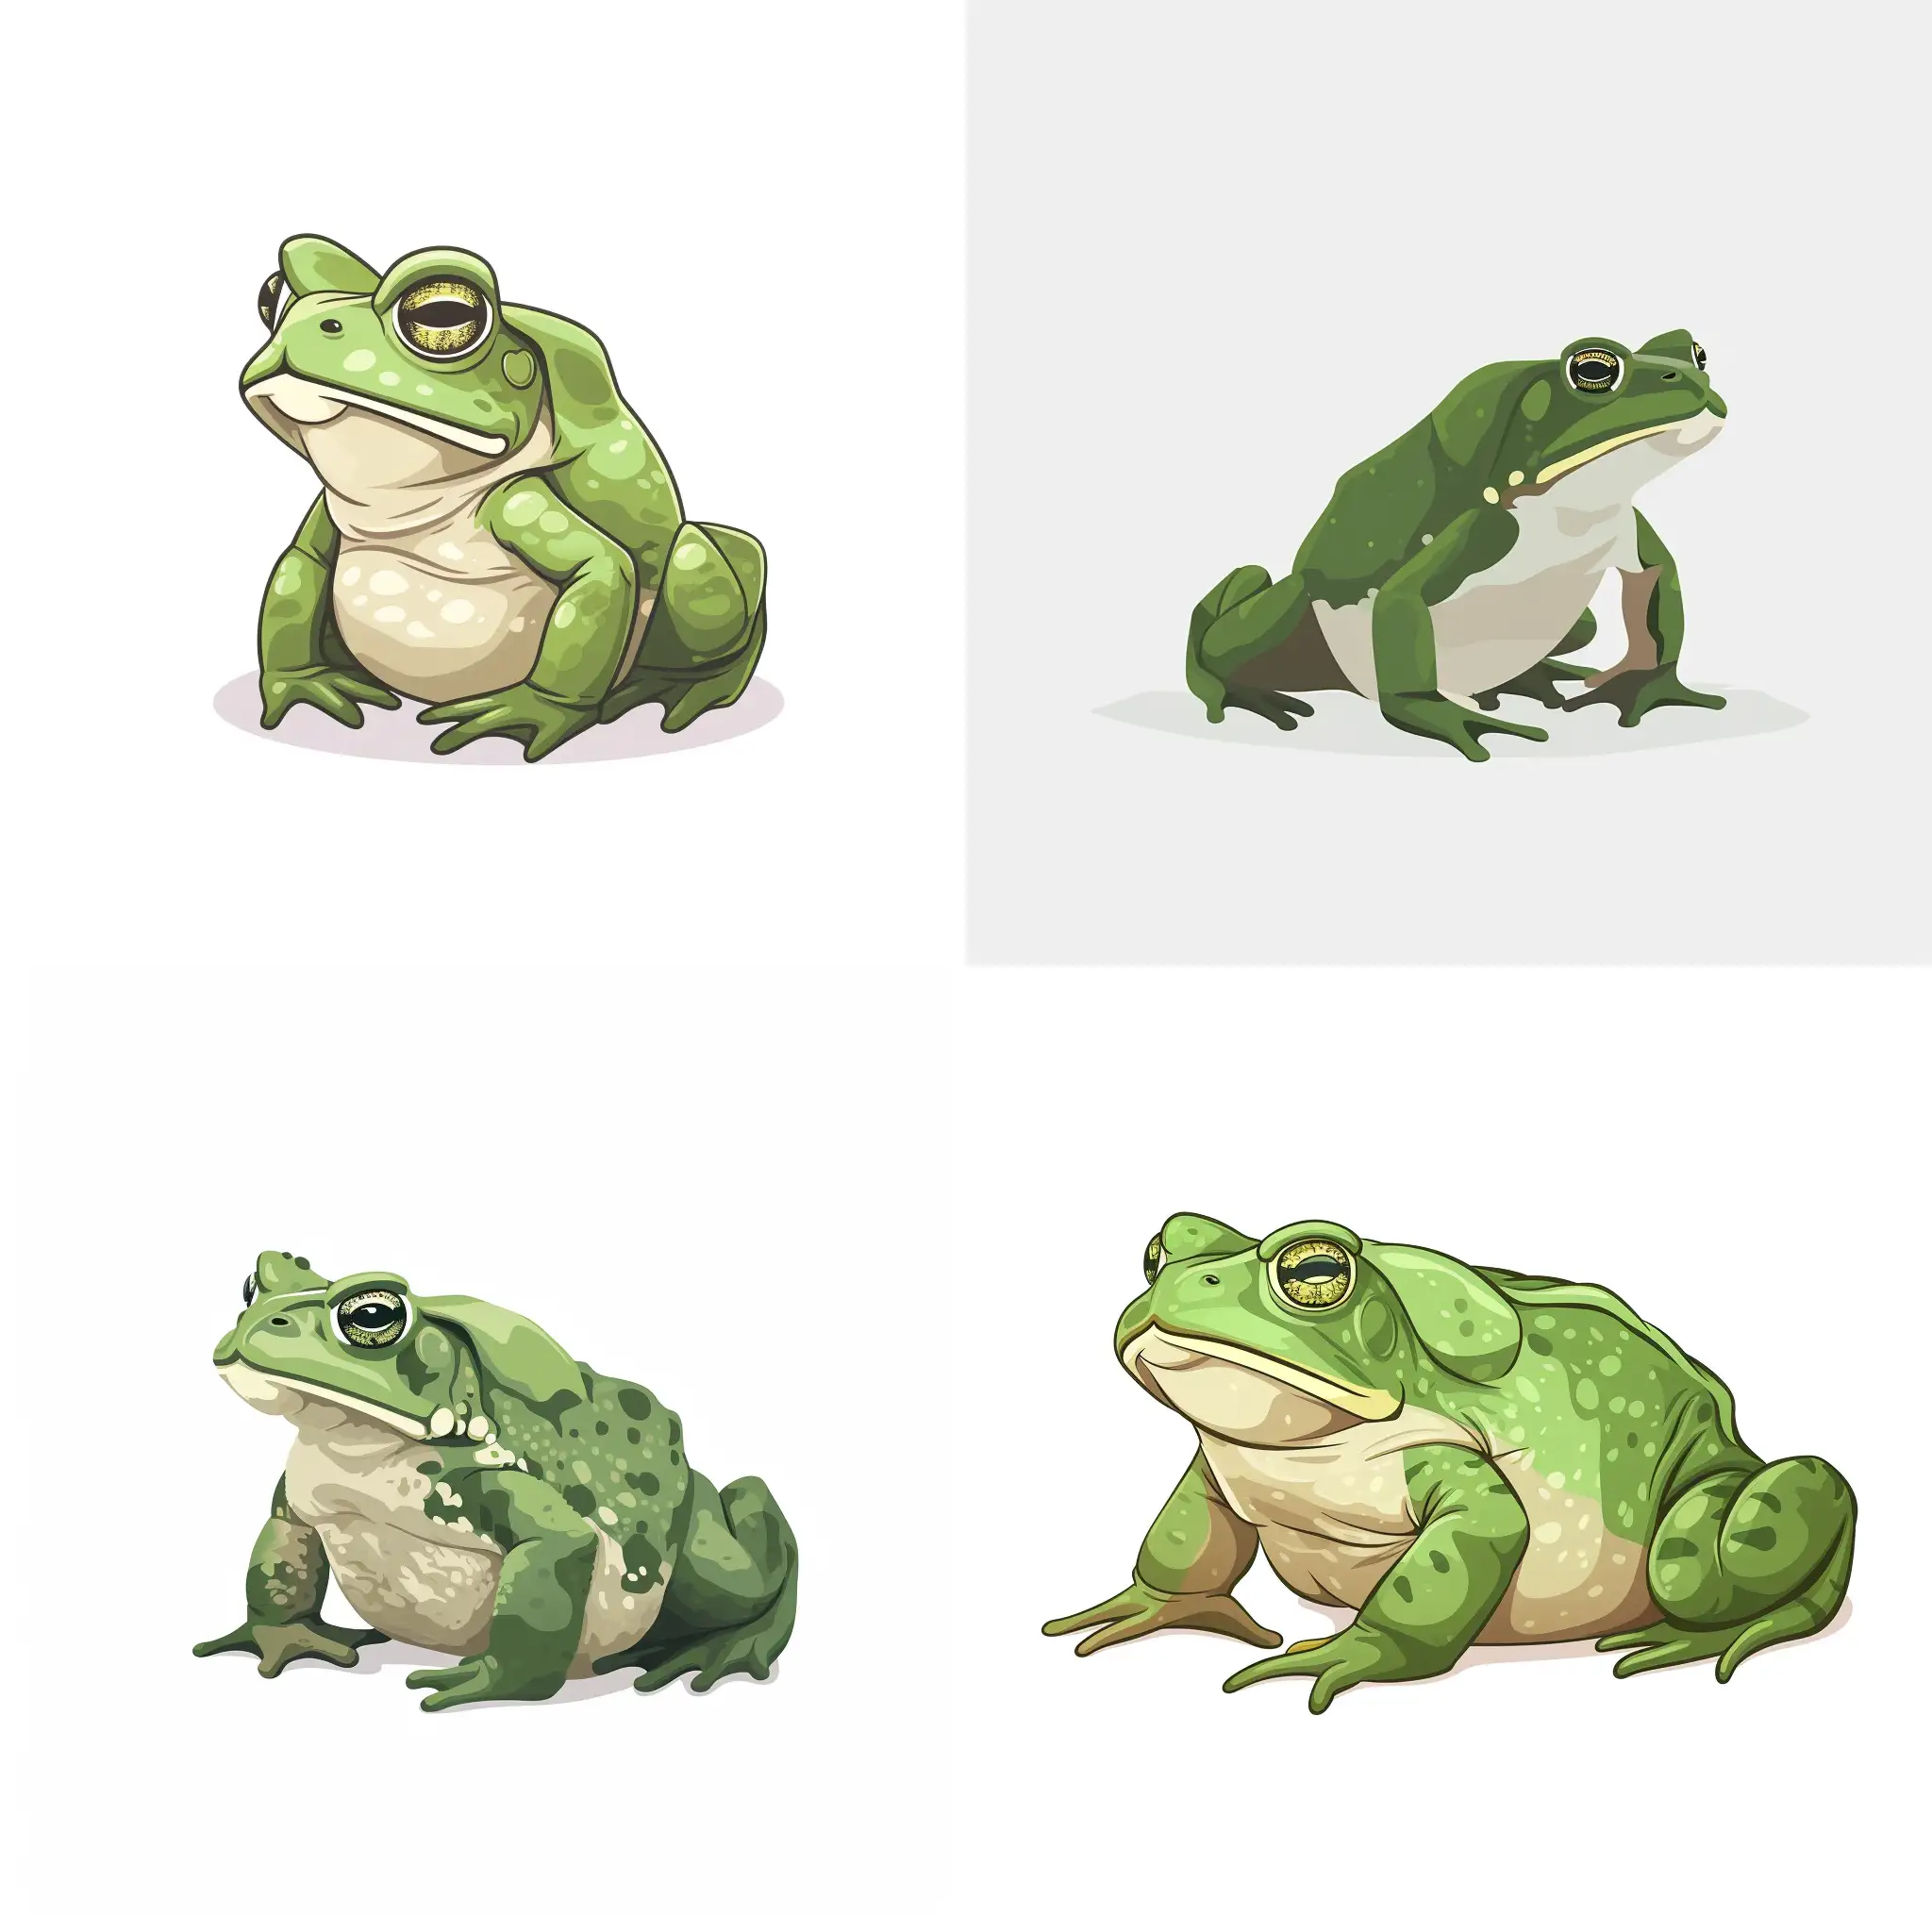 Minimalistic-Cartoon-Green-Toad-Illustration-on-a-Clean-White-Background